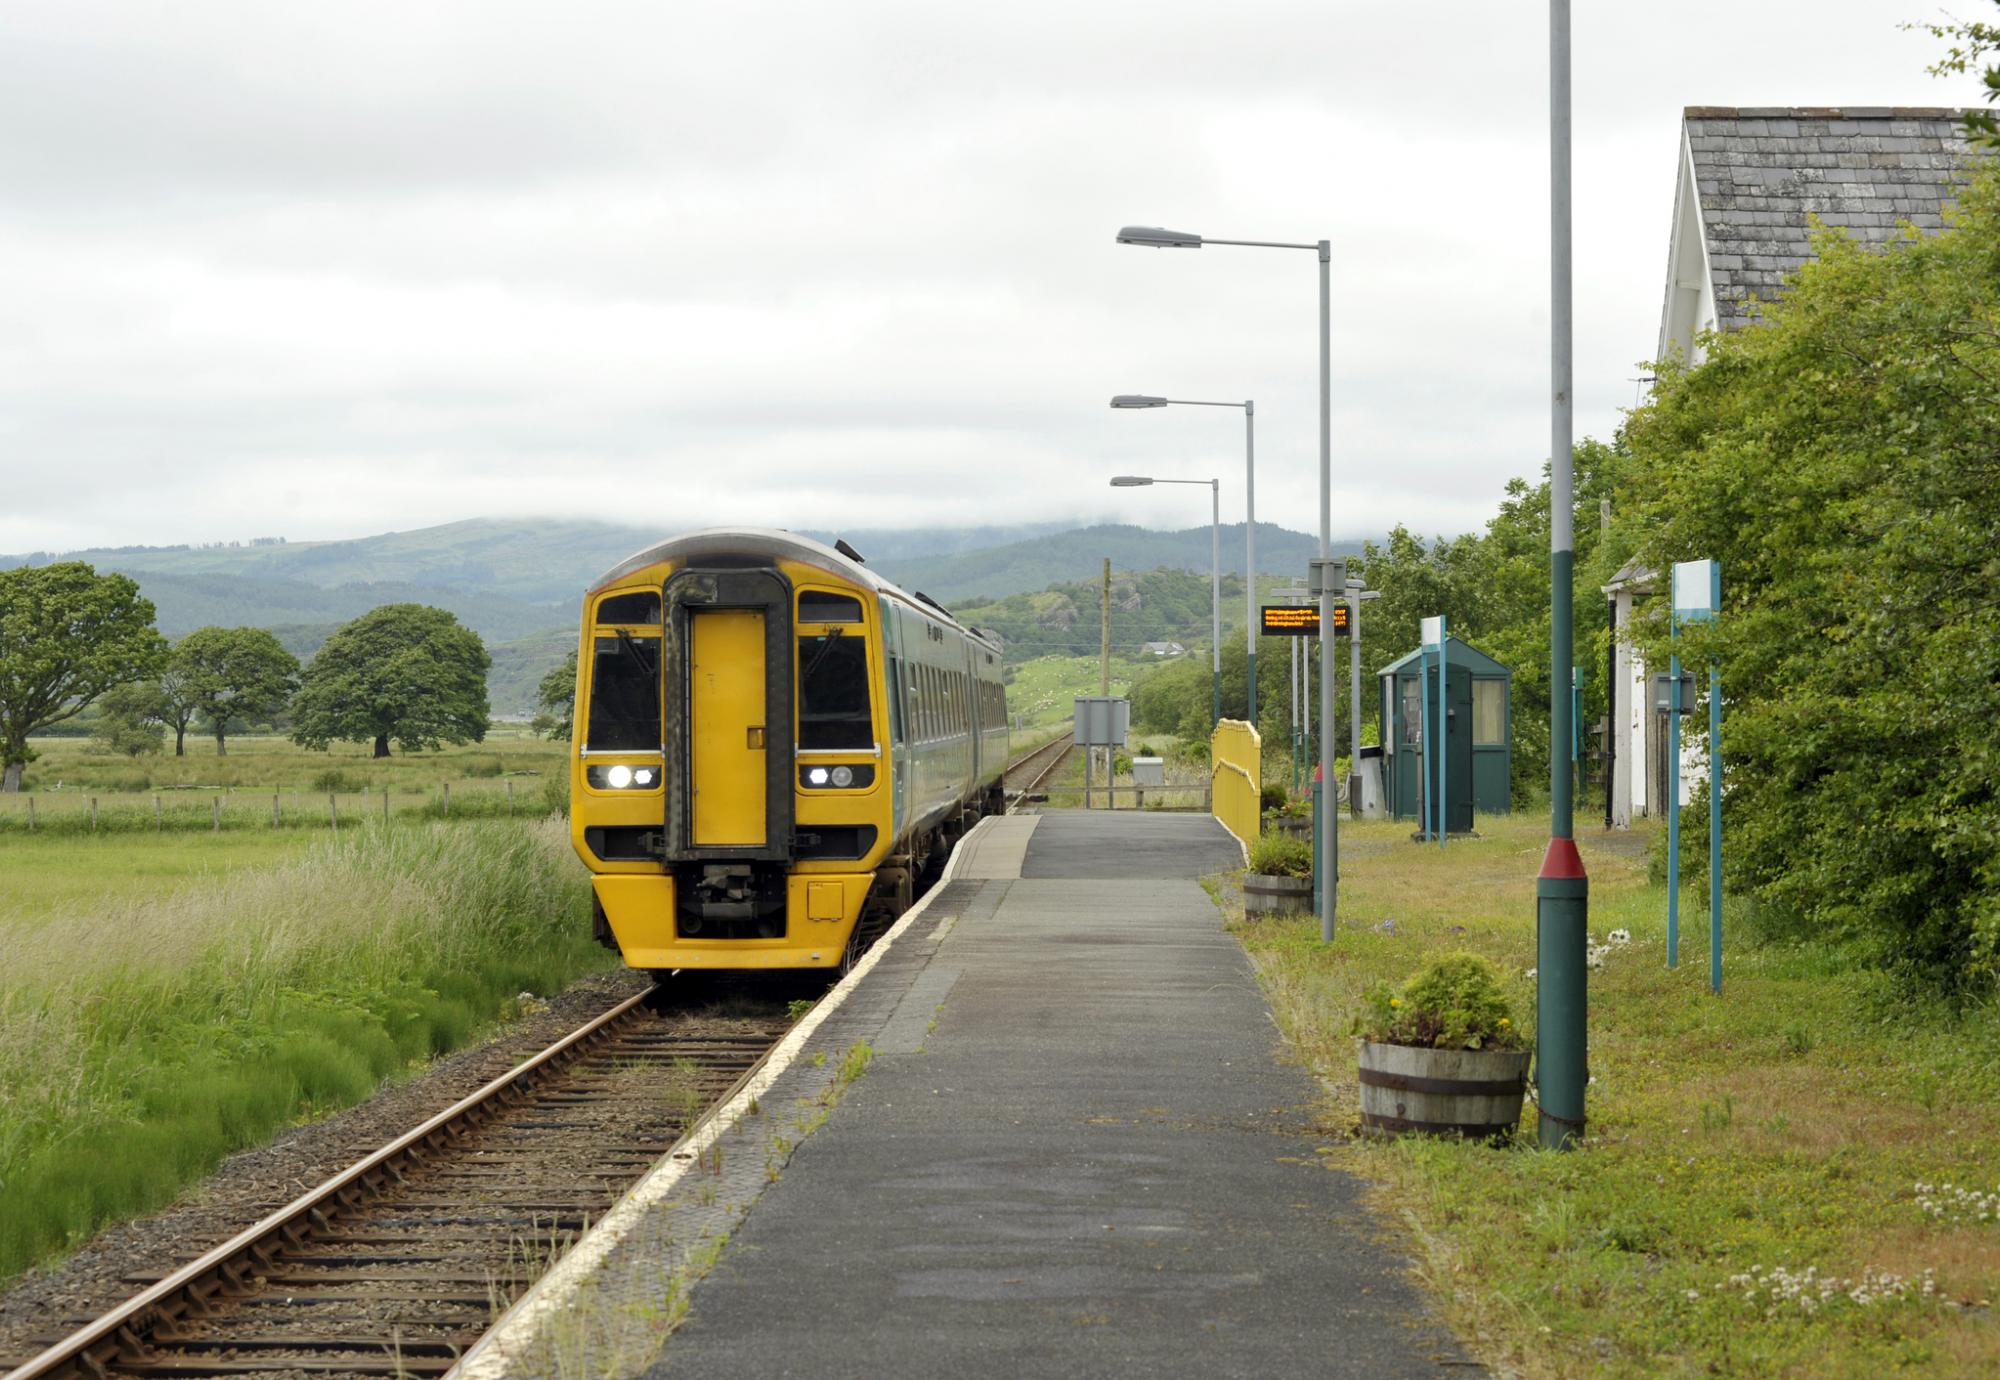 Train in service in North Wales